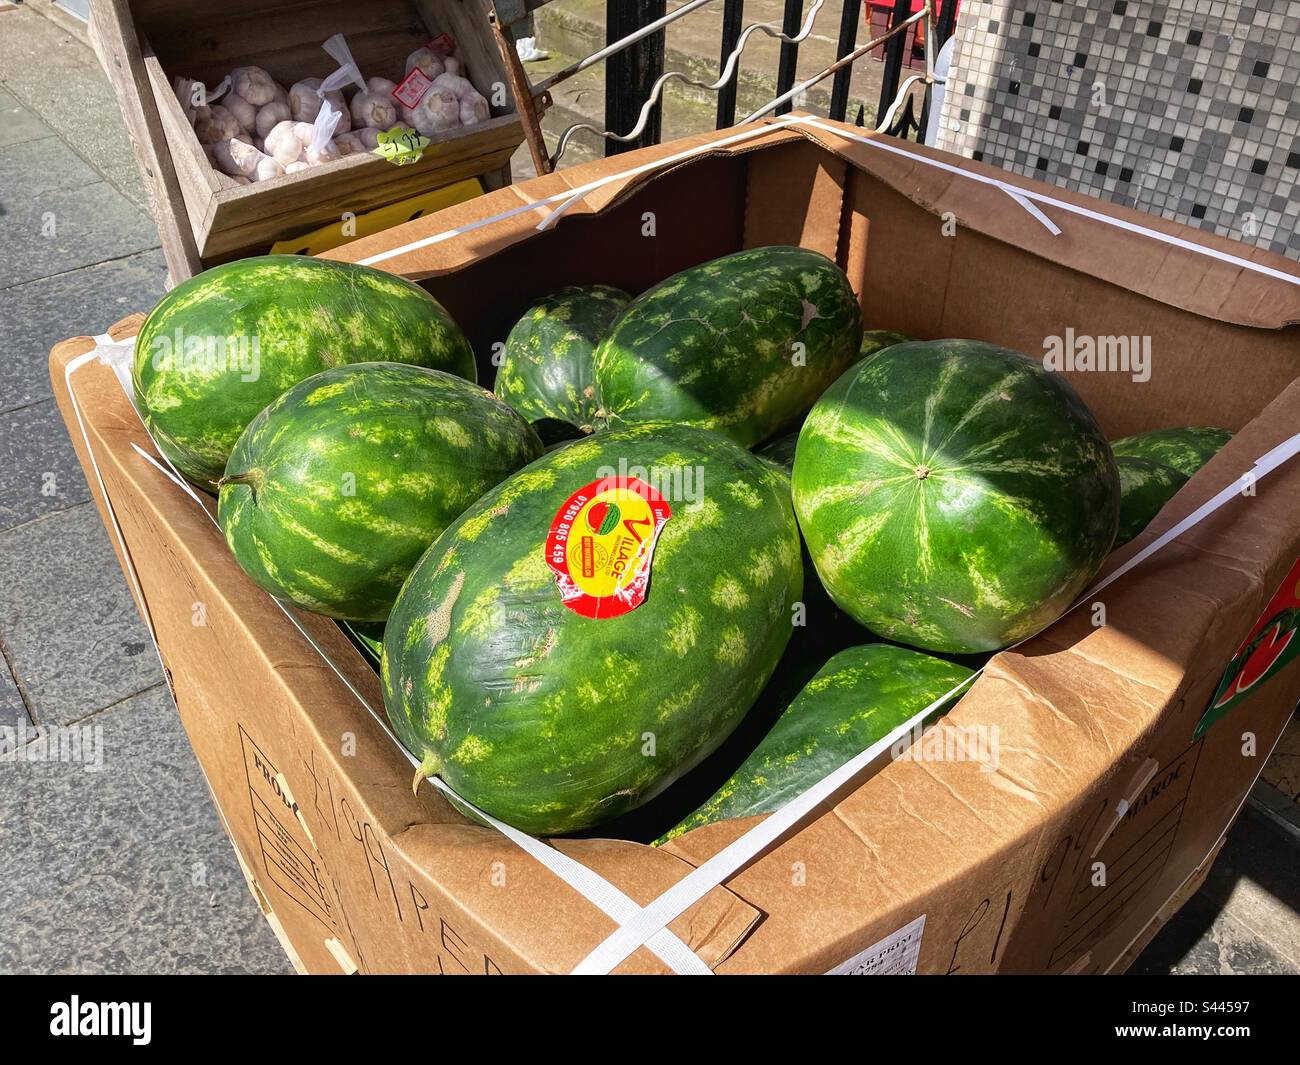 Box of Watermelons for sale at greengrocer Stock Photo